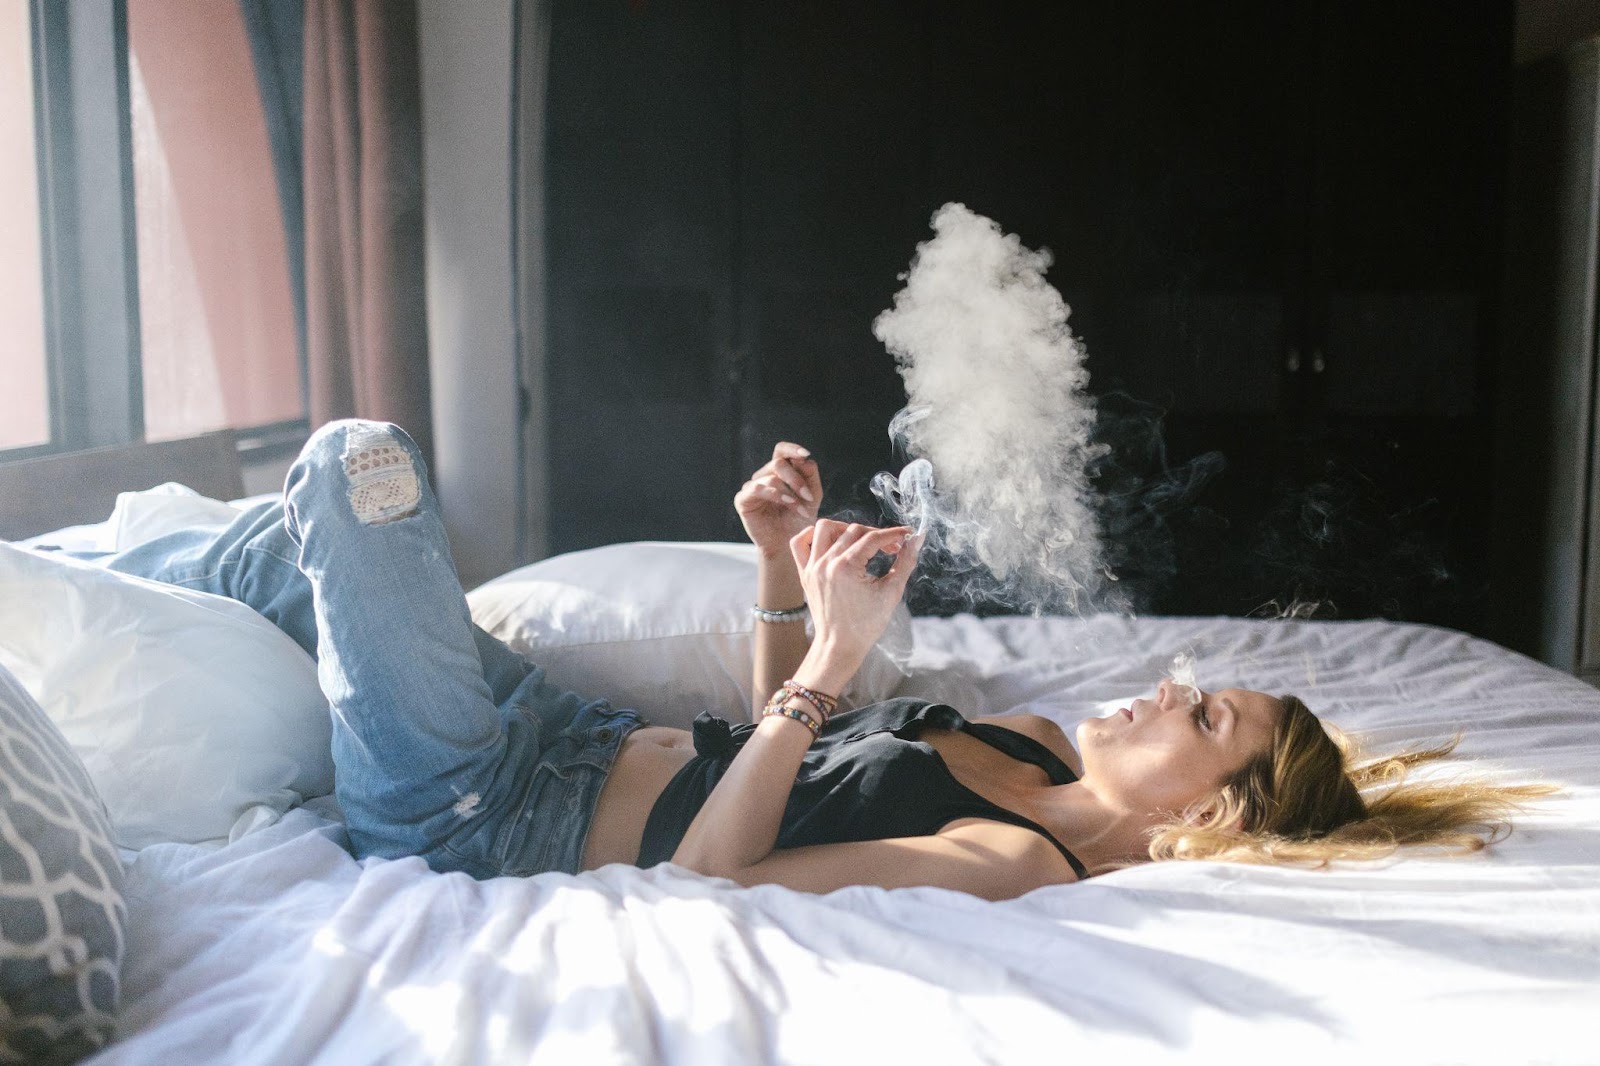 a woman smoking weed in bed